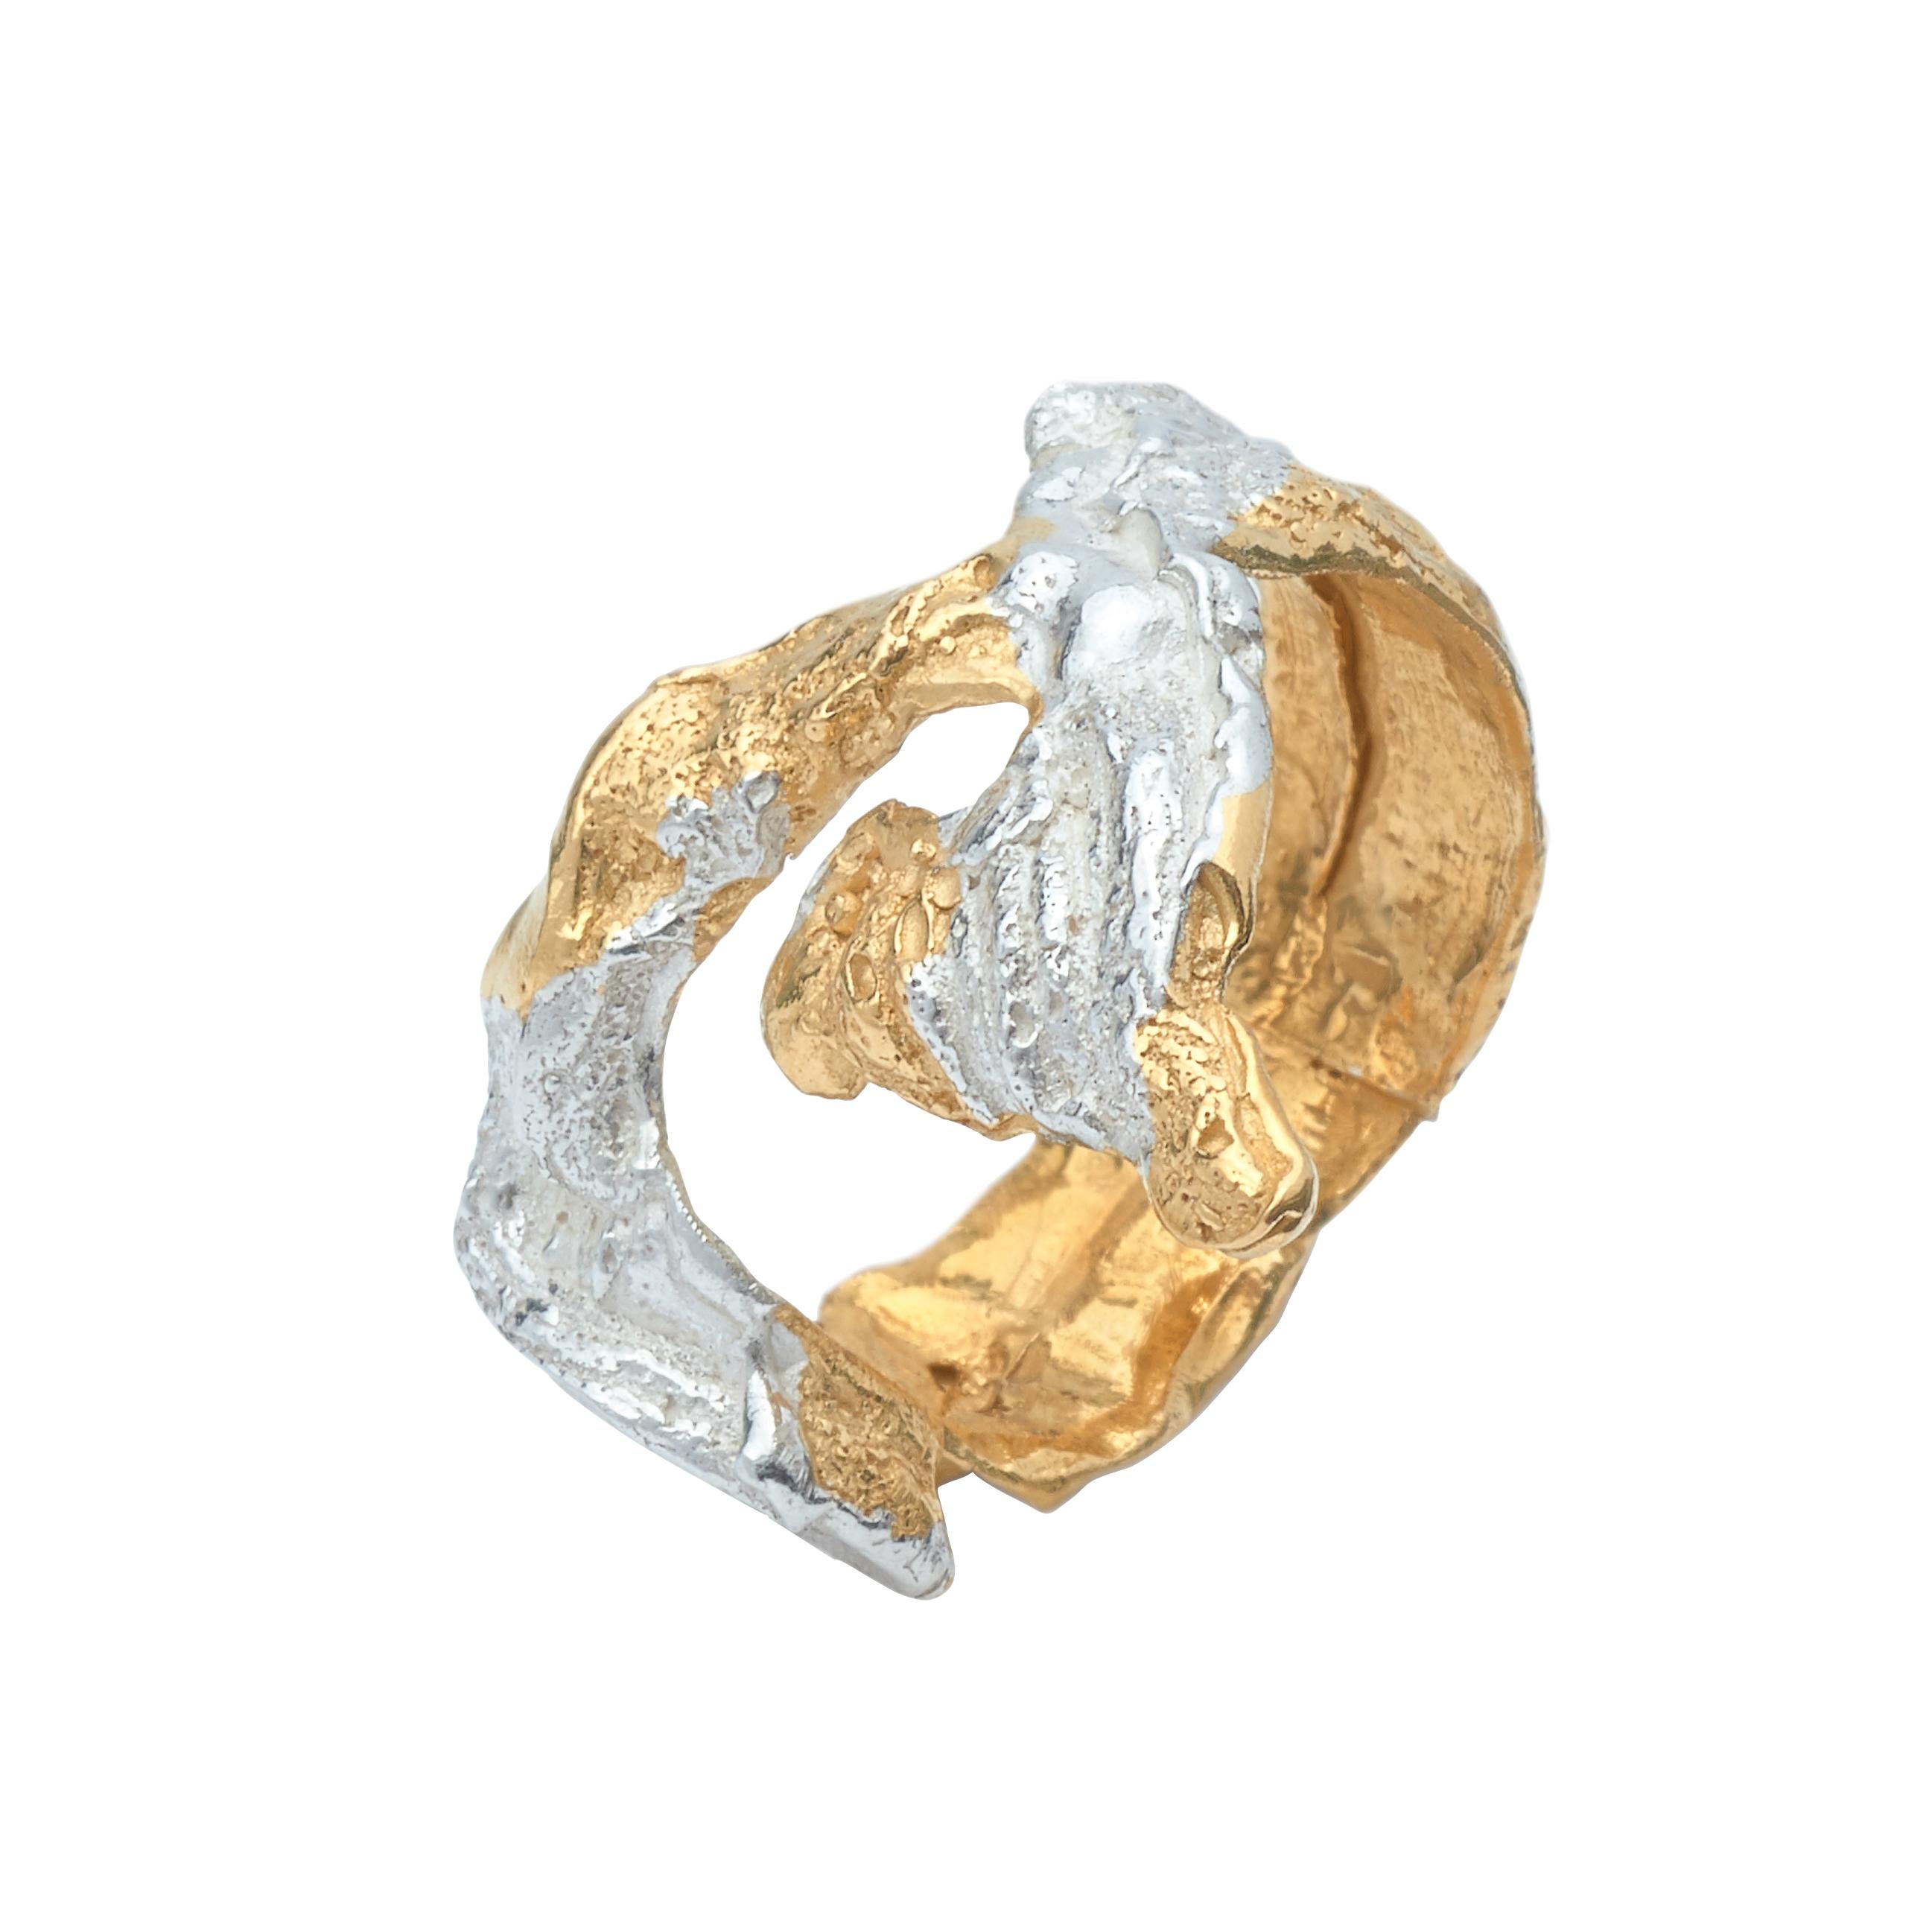 Loveness Lee - Ela - Gold and Silver textured ring For Sale